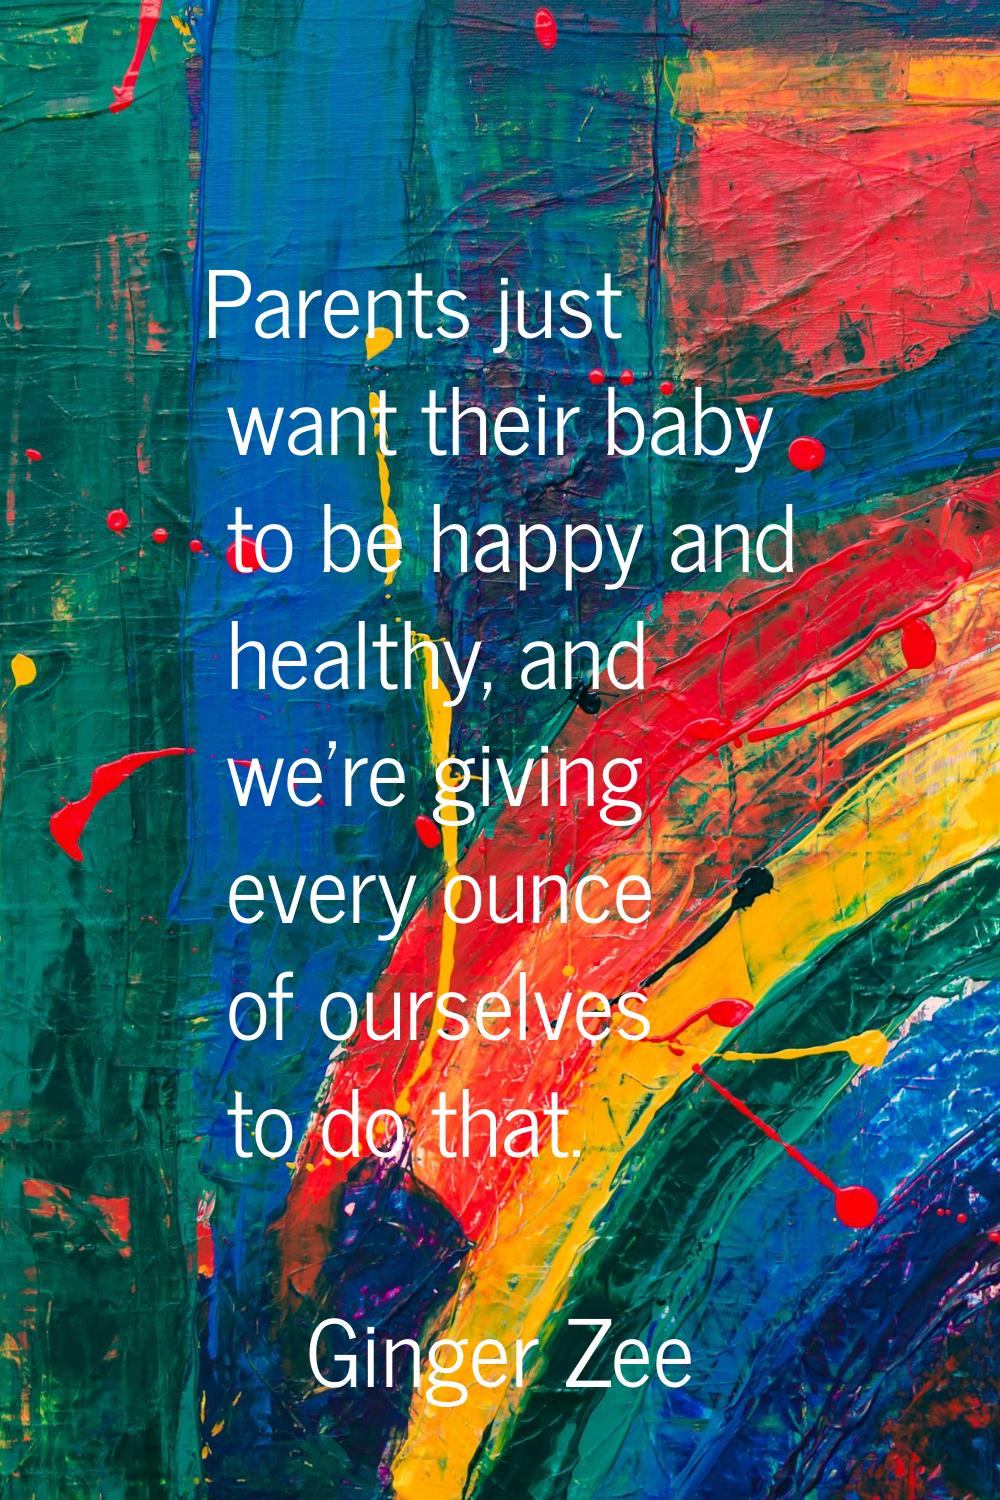 Parents just want their baby to be happy and healthy, and we're giving every ounce of ourselves to 